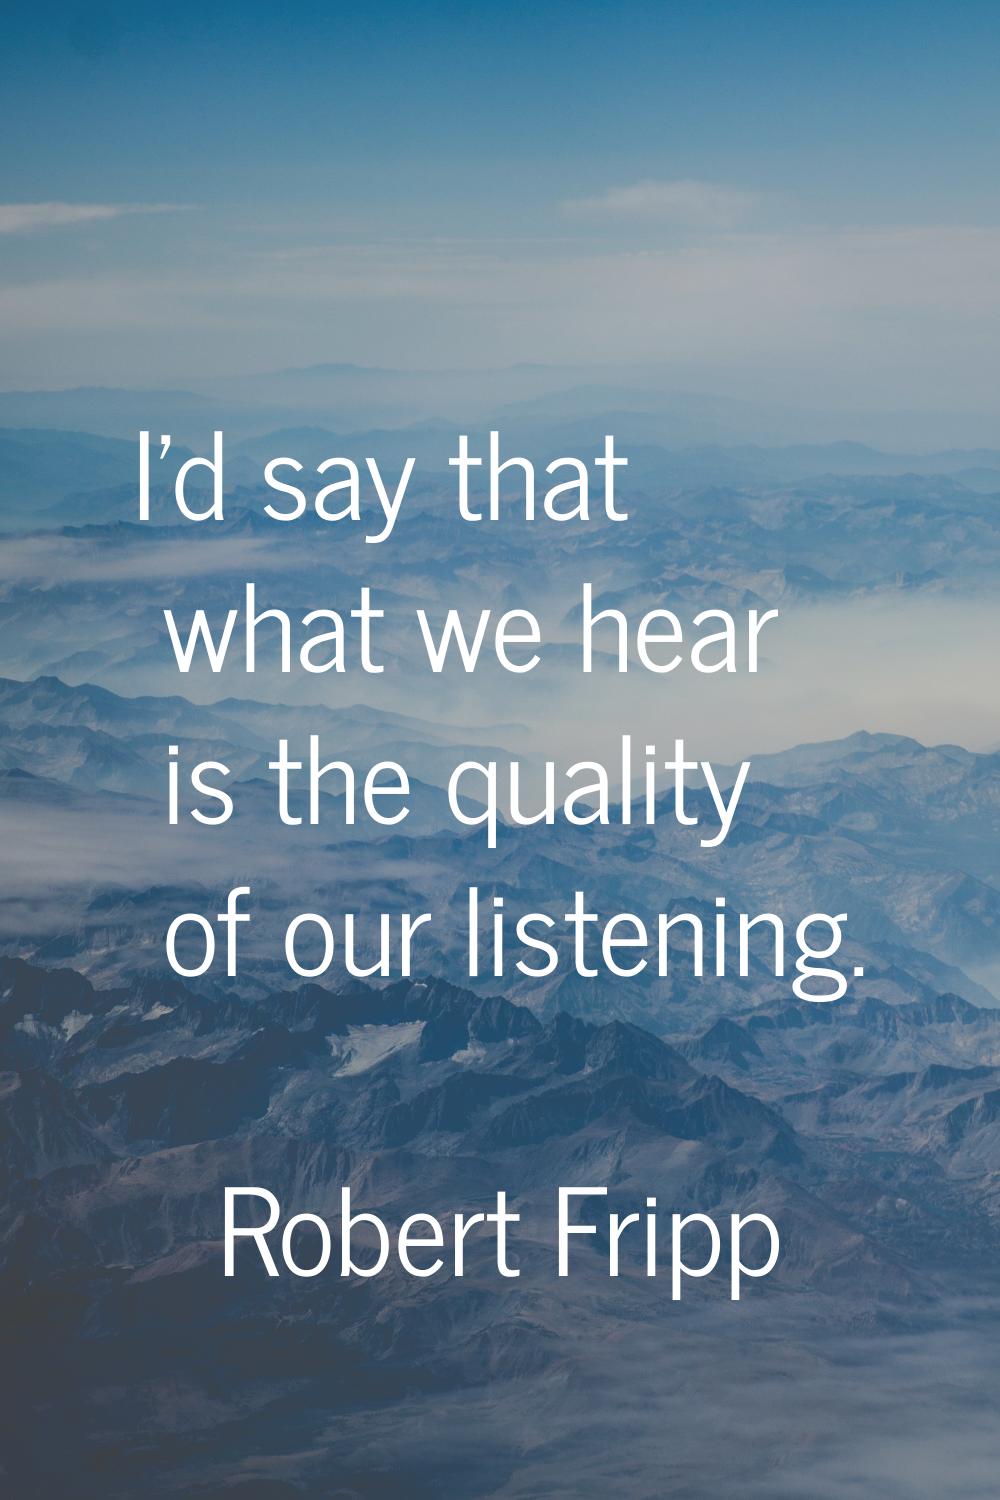 I'd say that what we hear is the quality of our listening.